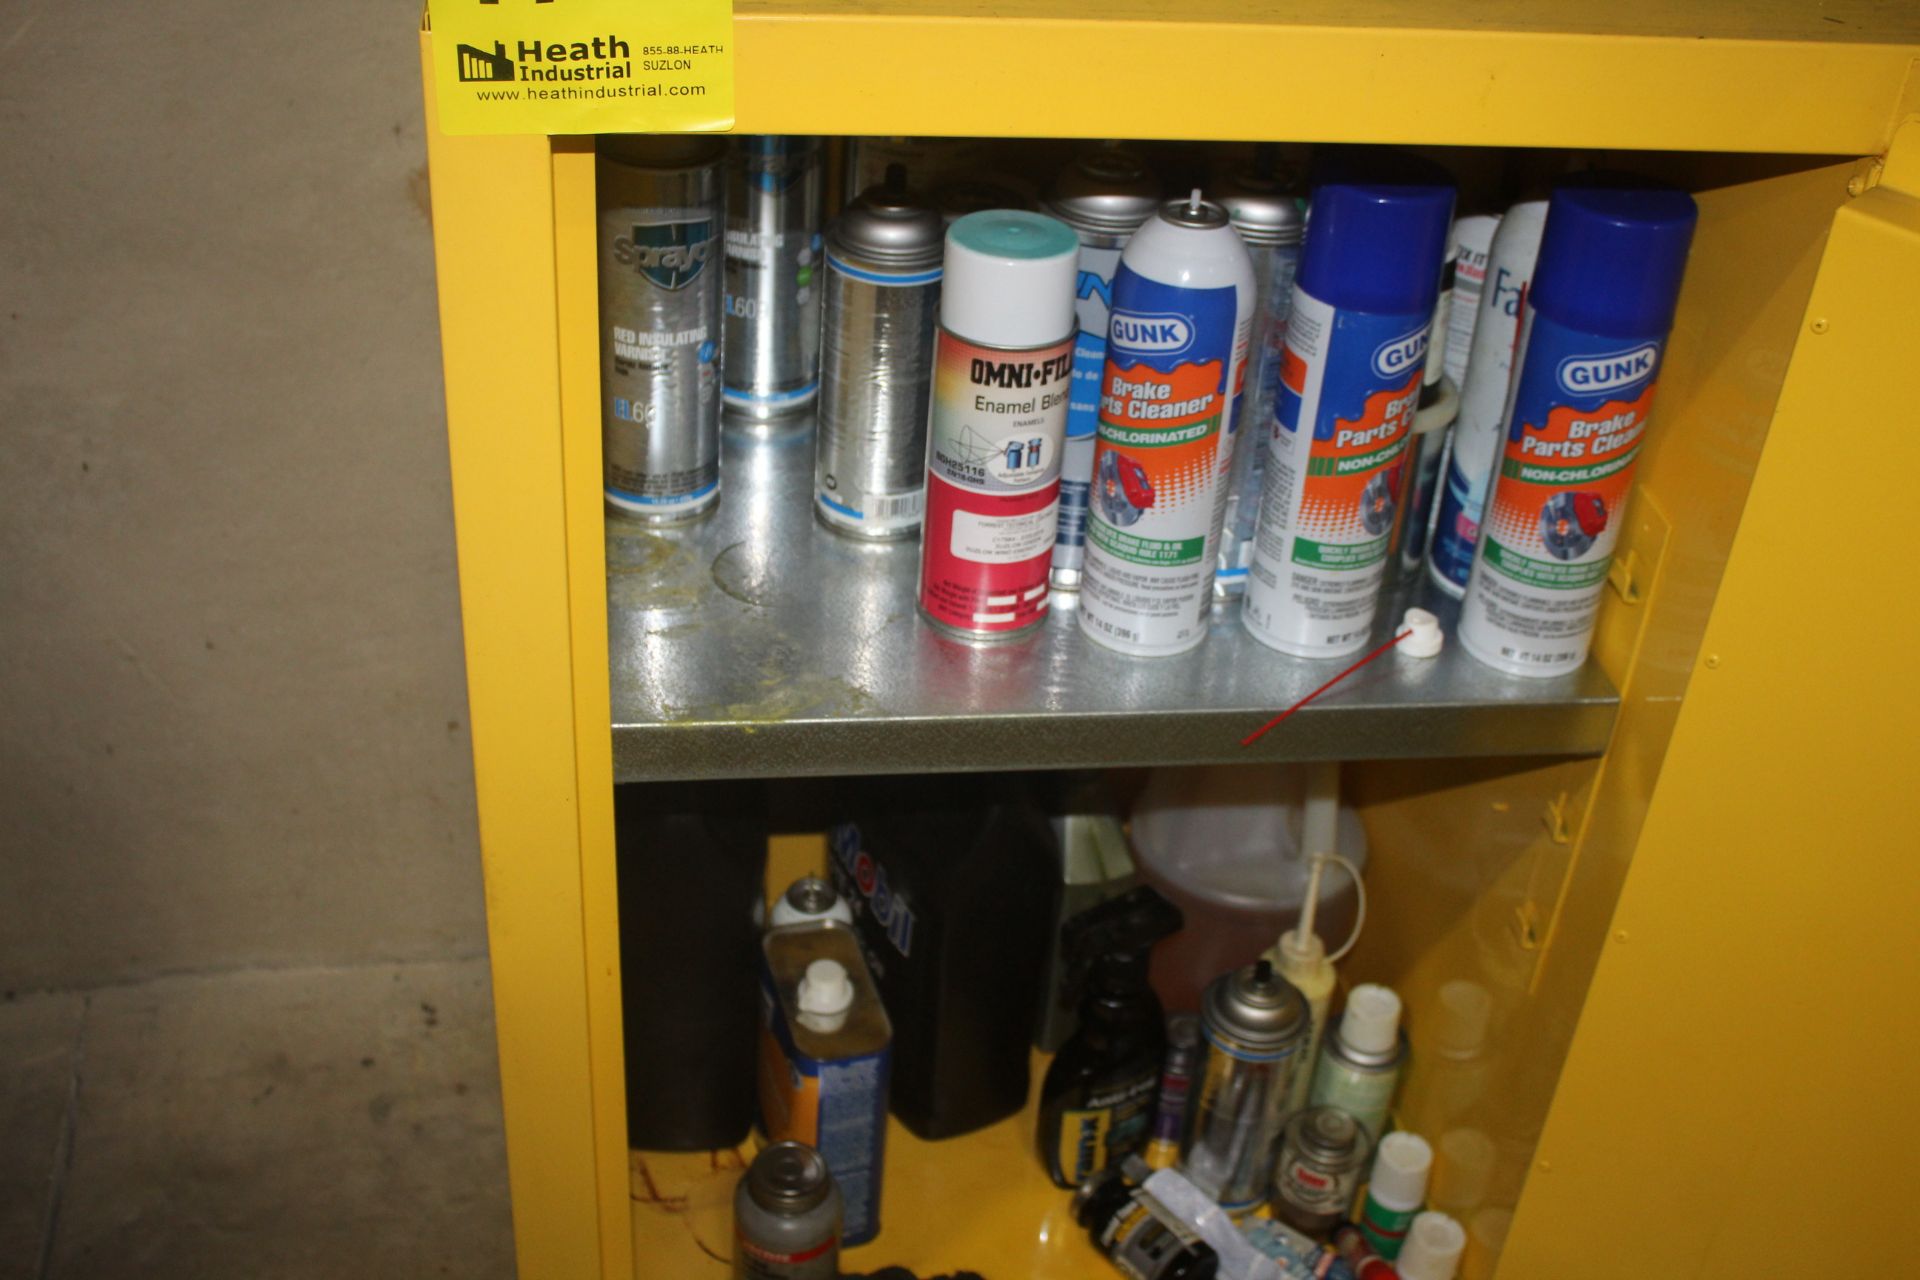 ULINE FLAMMABLE LIQUID STORAGE CABINET, 23" X 18" X 35" WITH CONTENTS (AEROSOLS, CLEANERS, ETC.) - Image 3 of 3